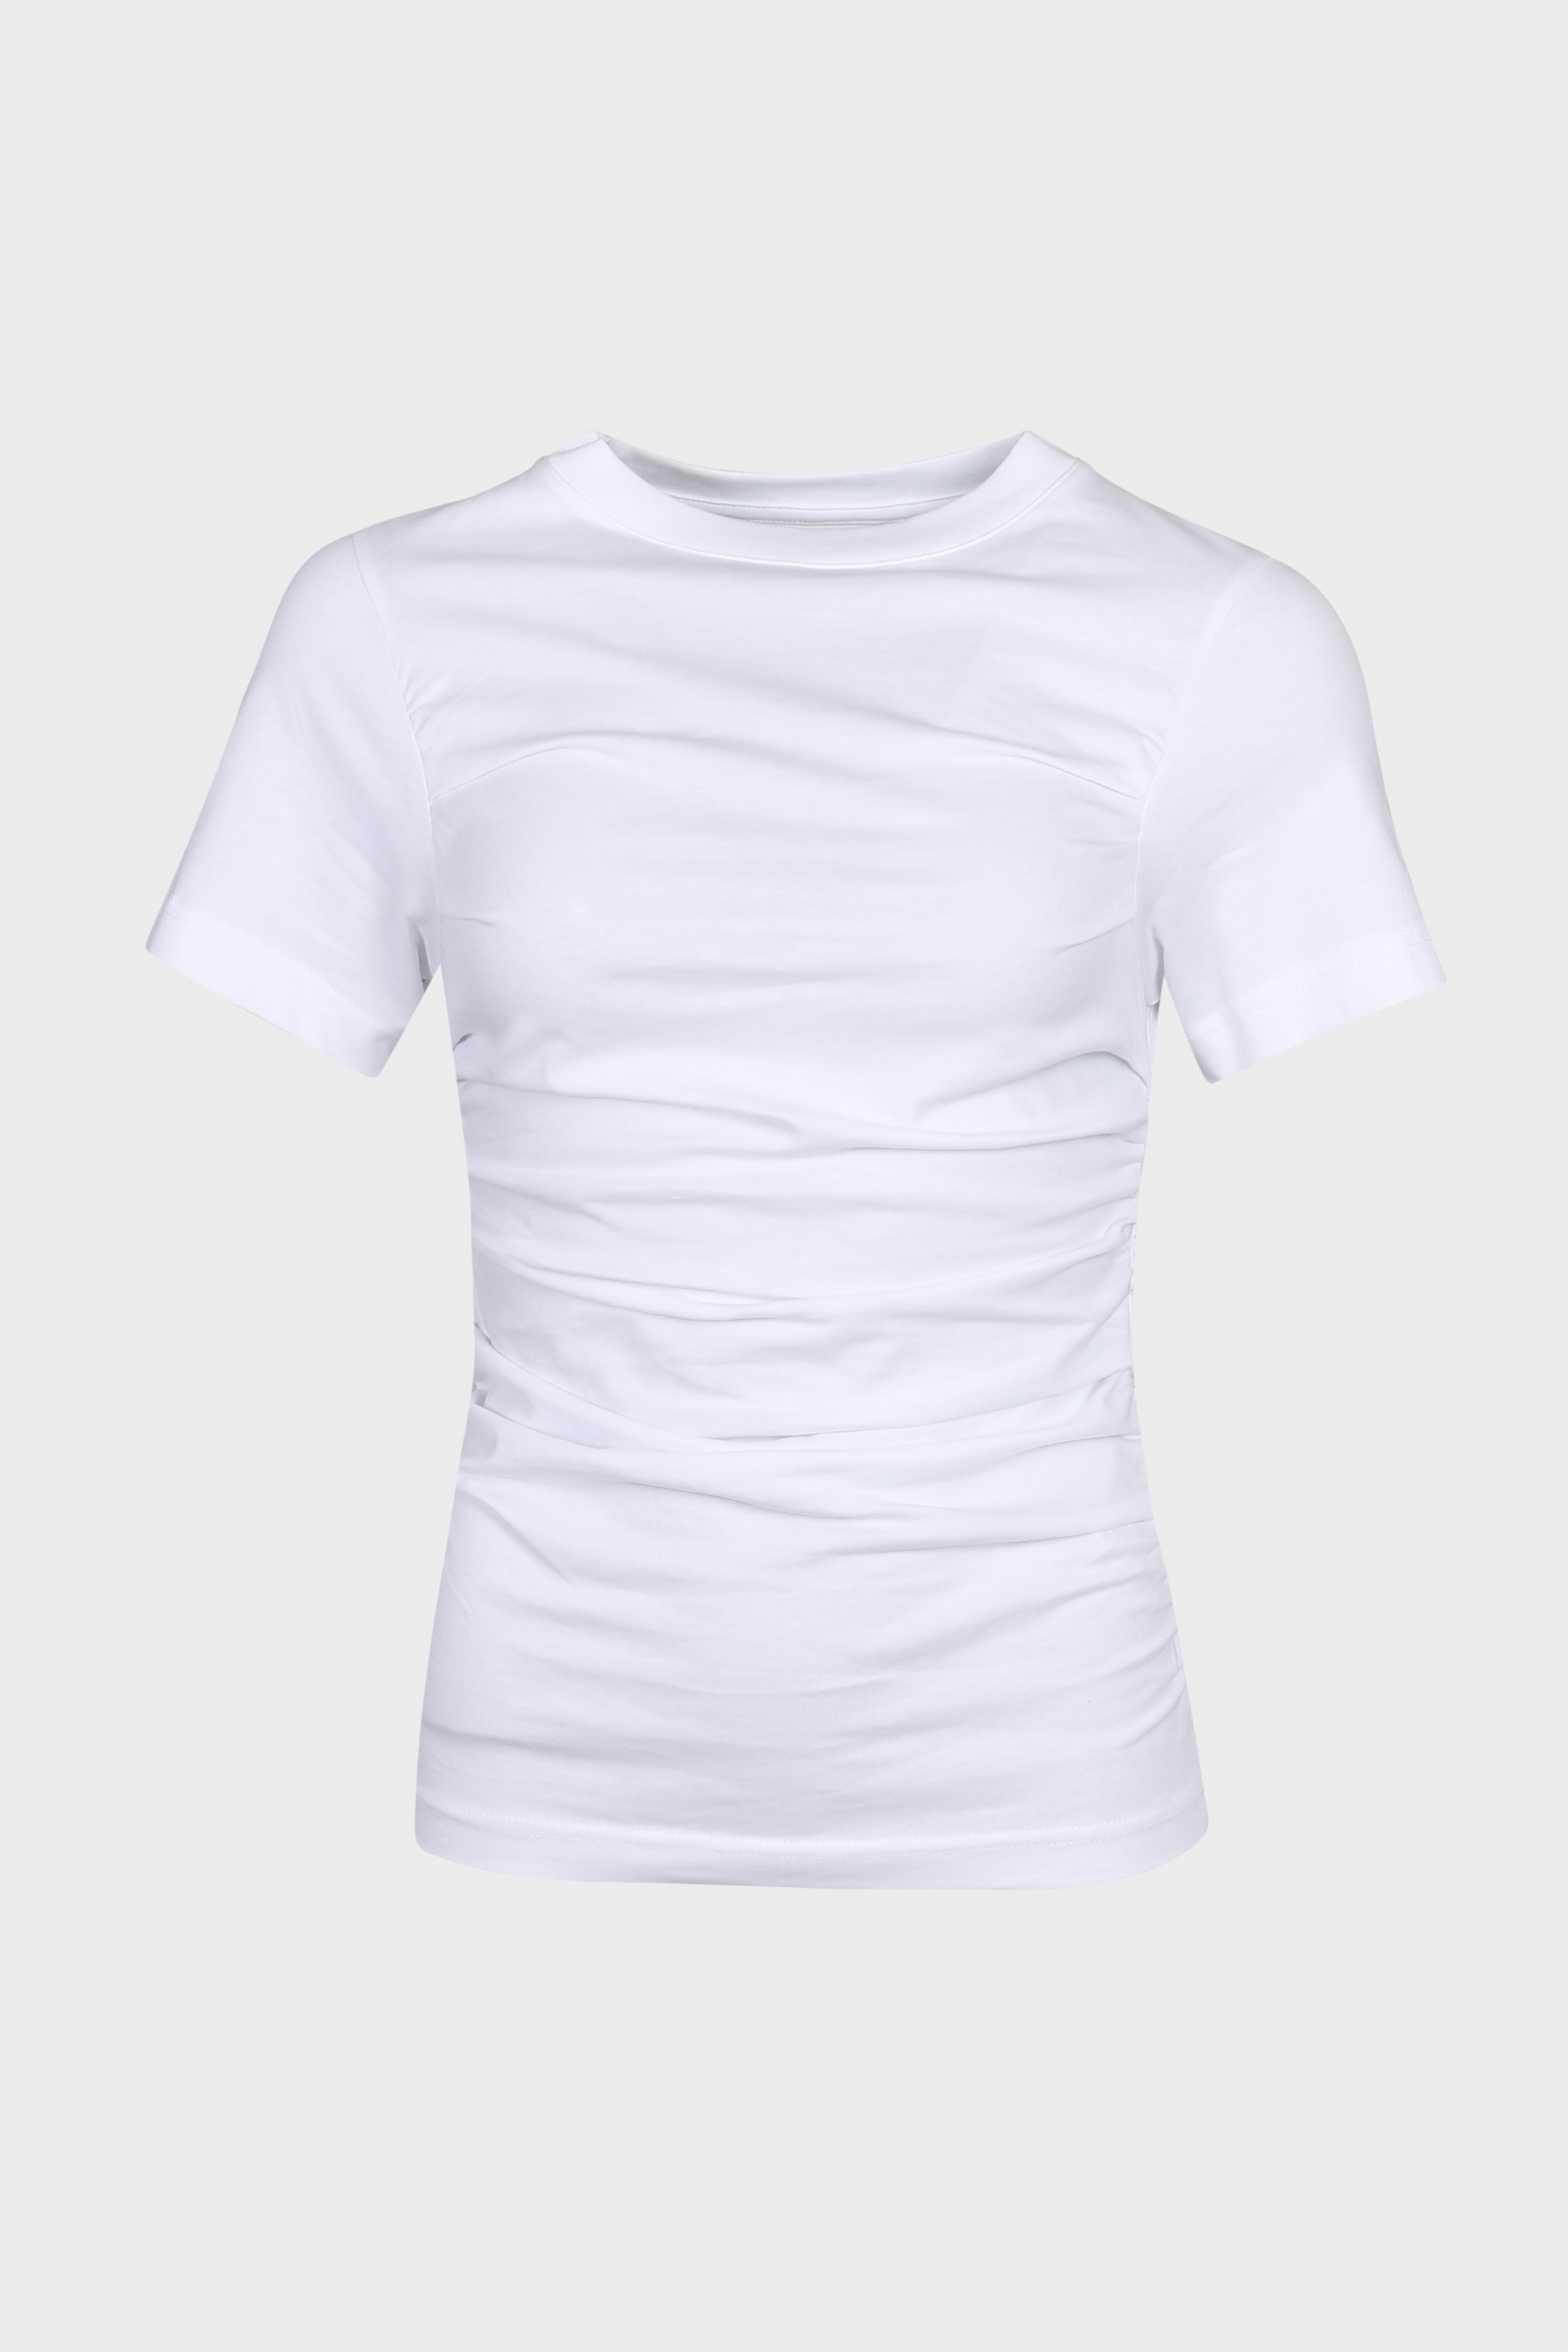 AXEL ARIGATO Gathered T-Shirt in White S